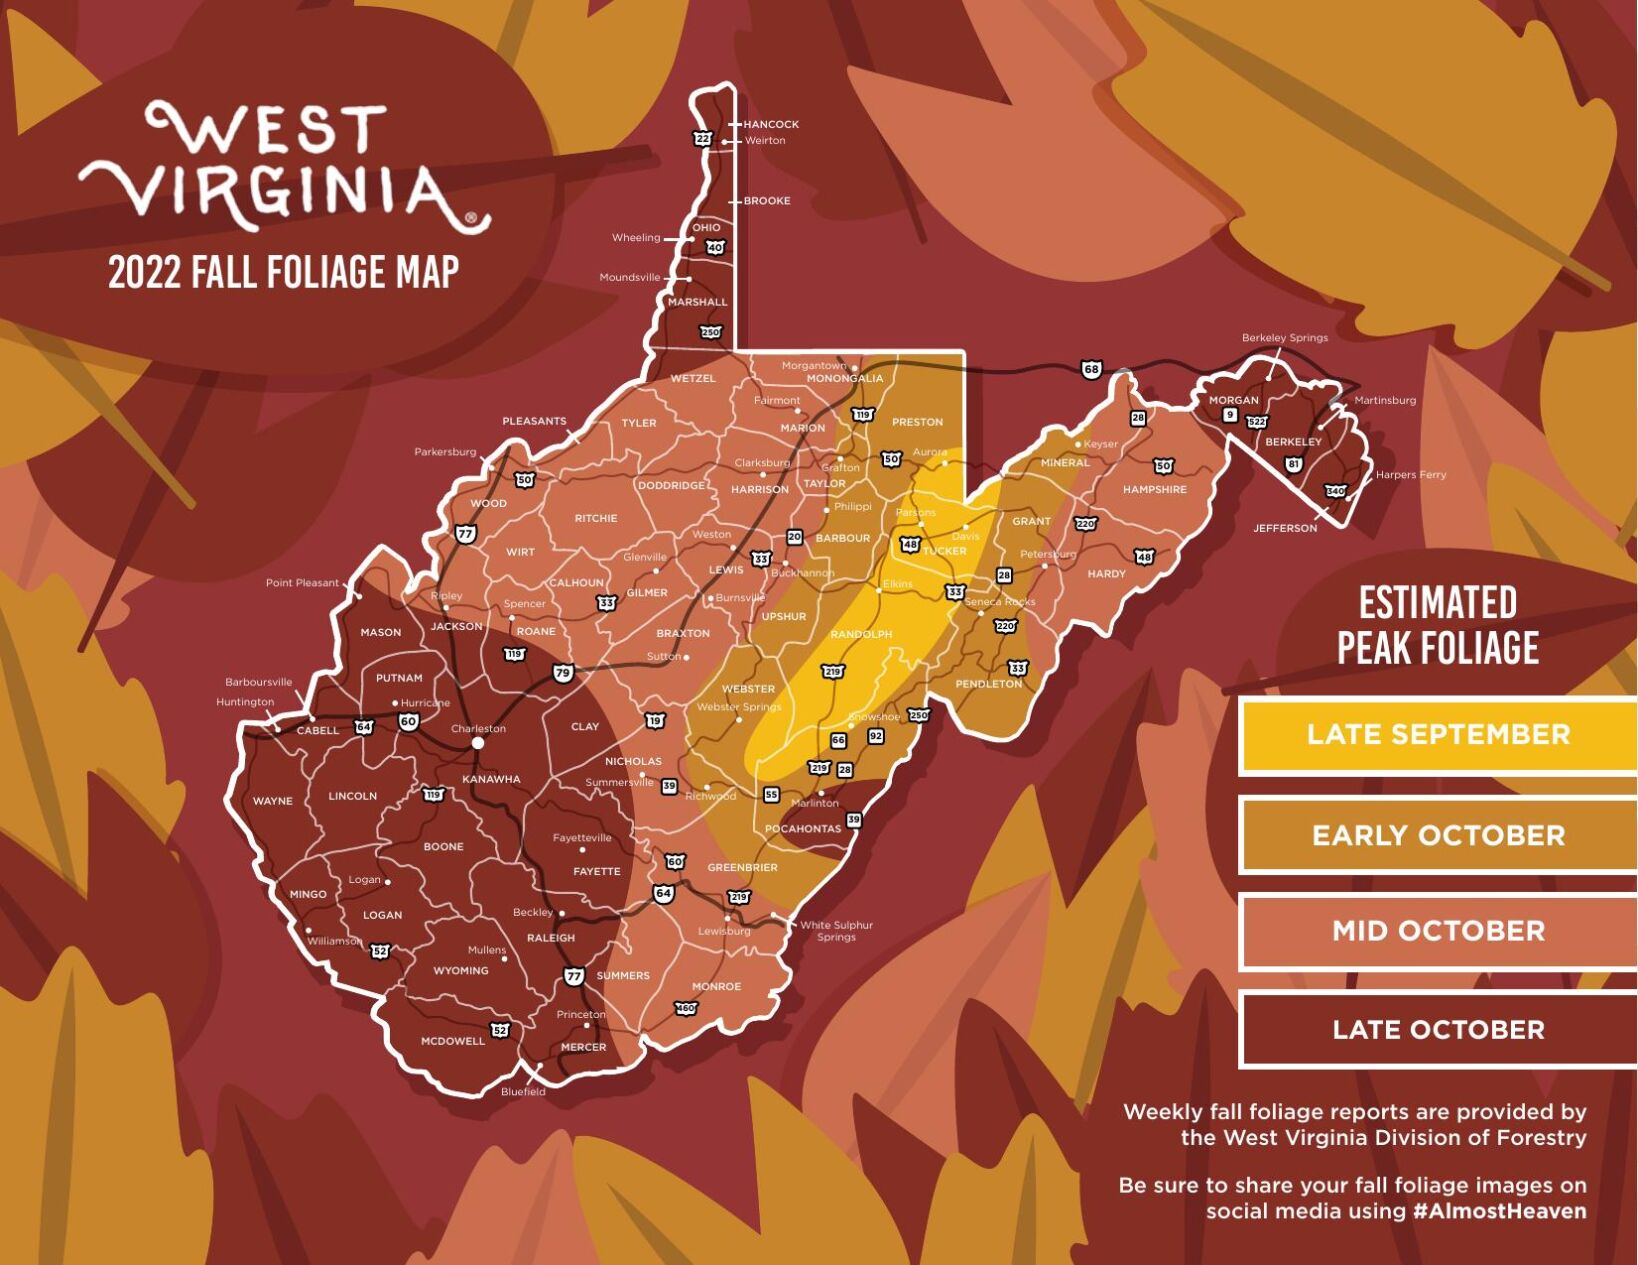 Fall foliage is here; break out your cameras and smartphones | fox43.com